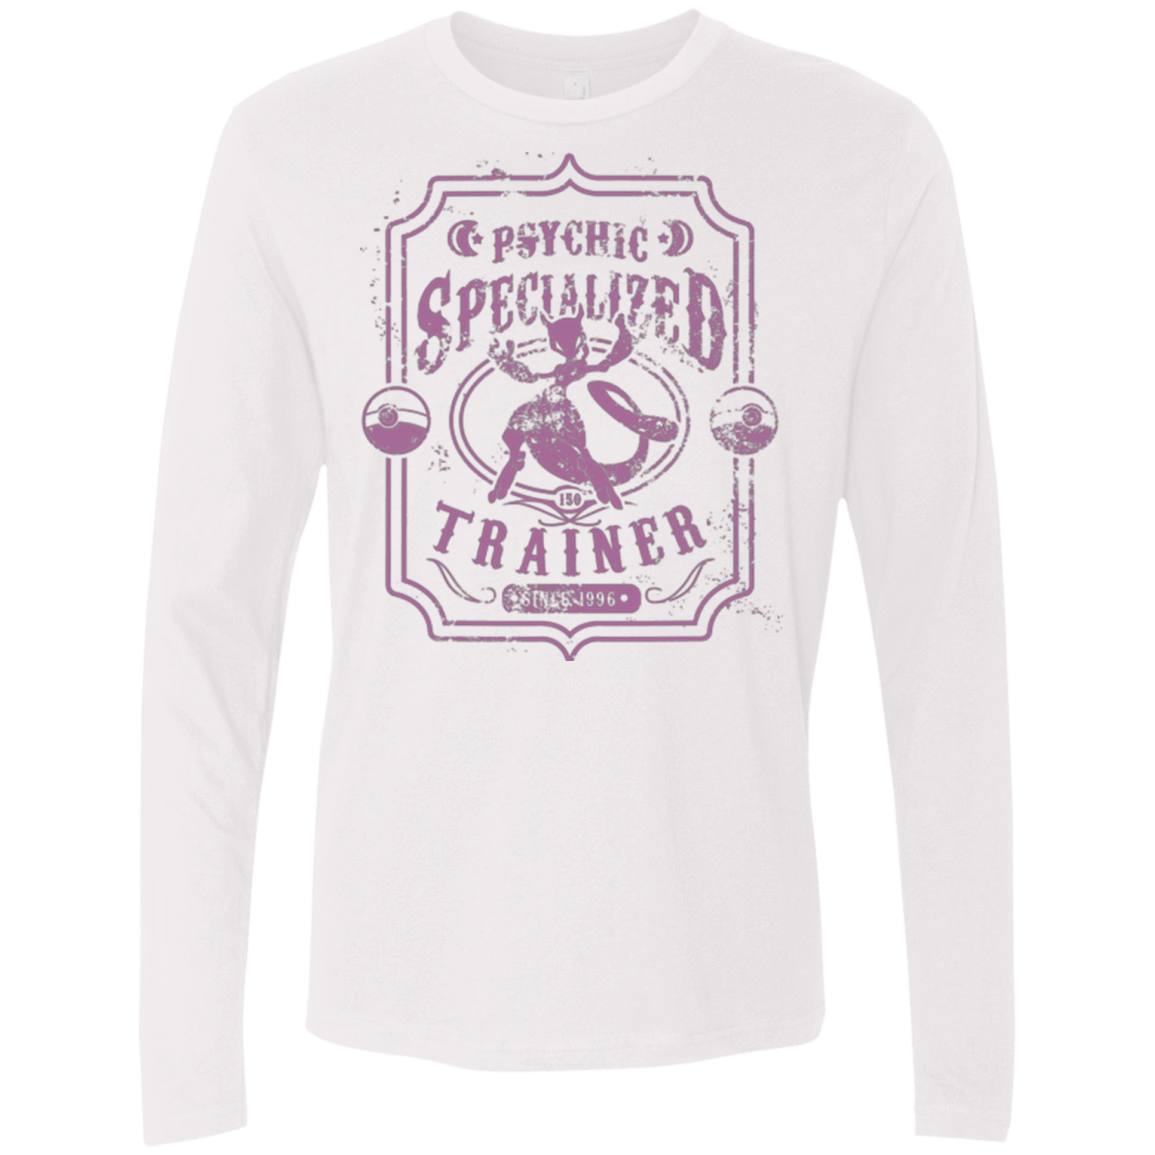 T-Shirts White / Small Psychic Specialized Trainer 2 Men's Premium Long Sleeve